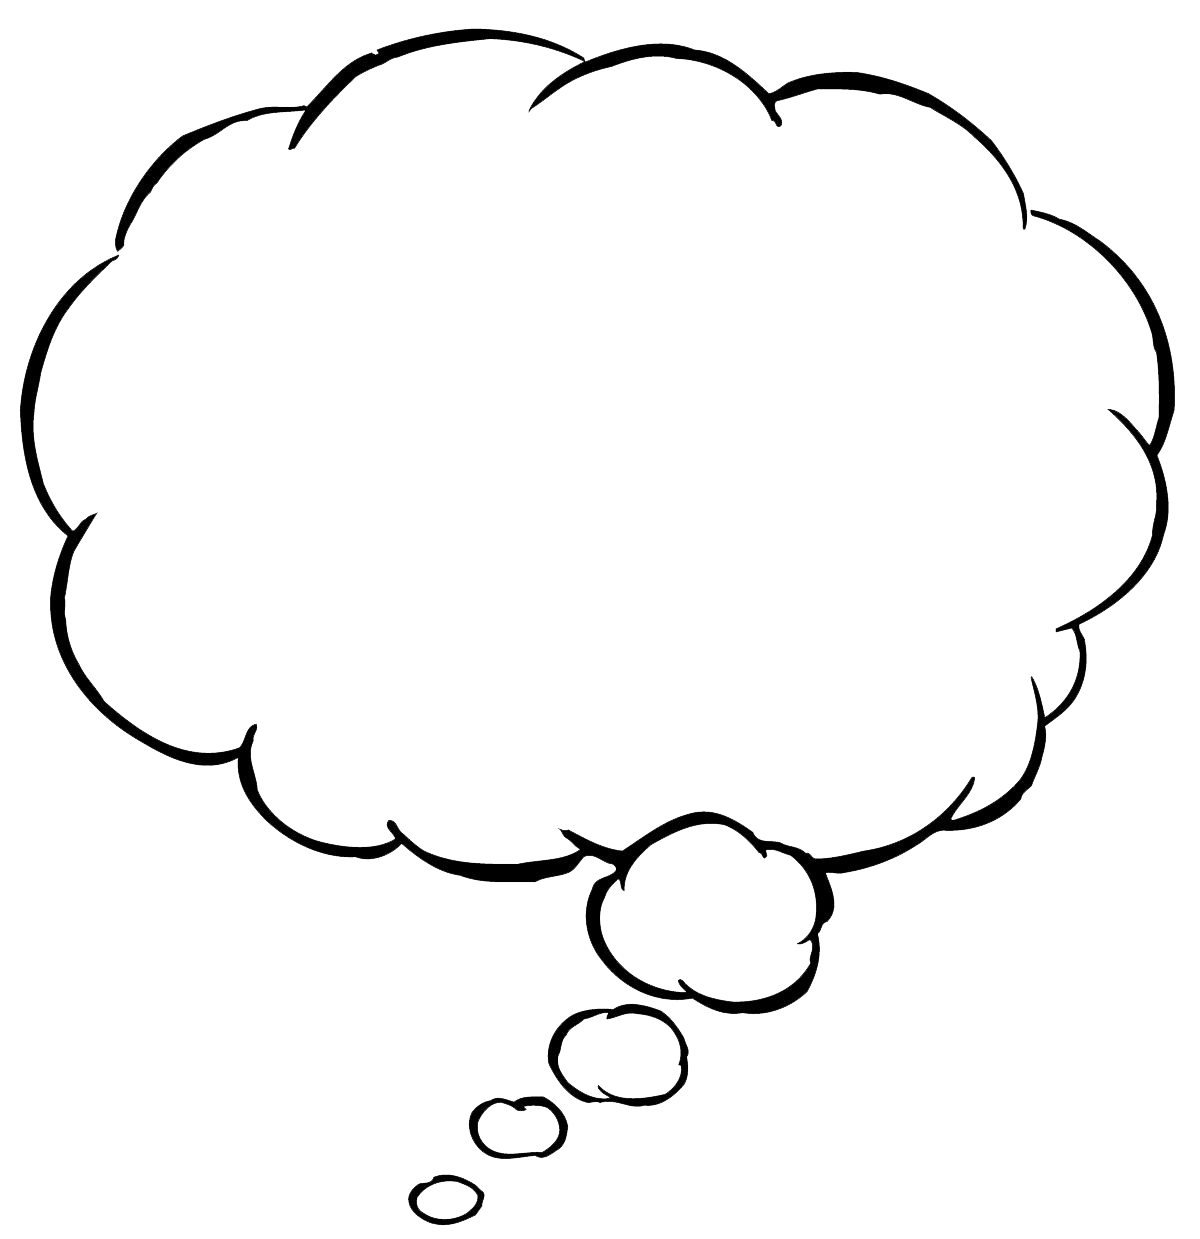 Thought Bubble PNG Image